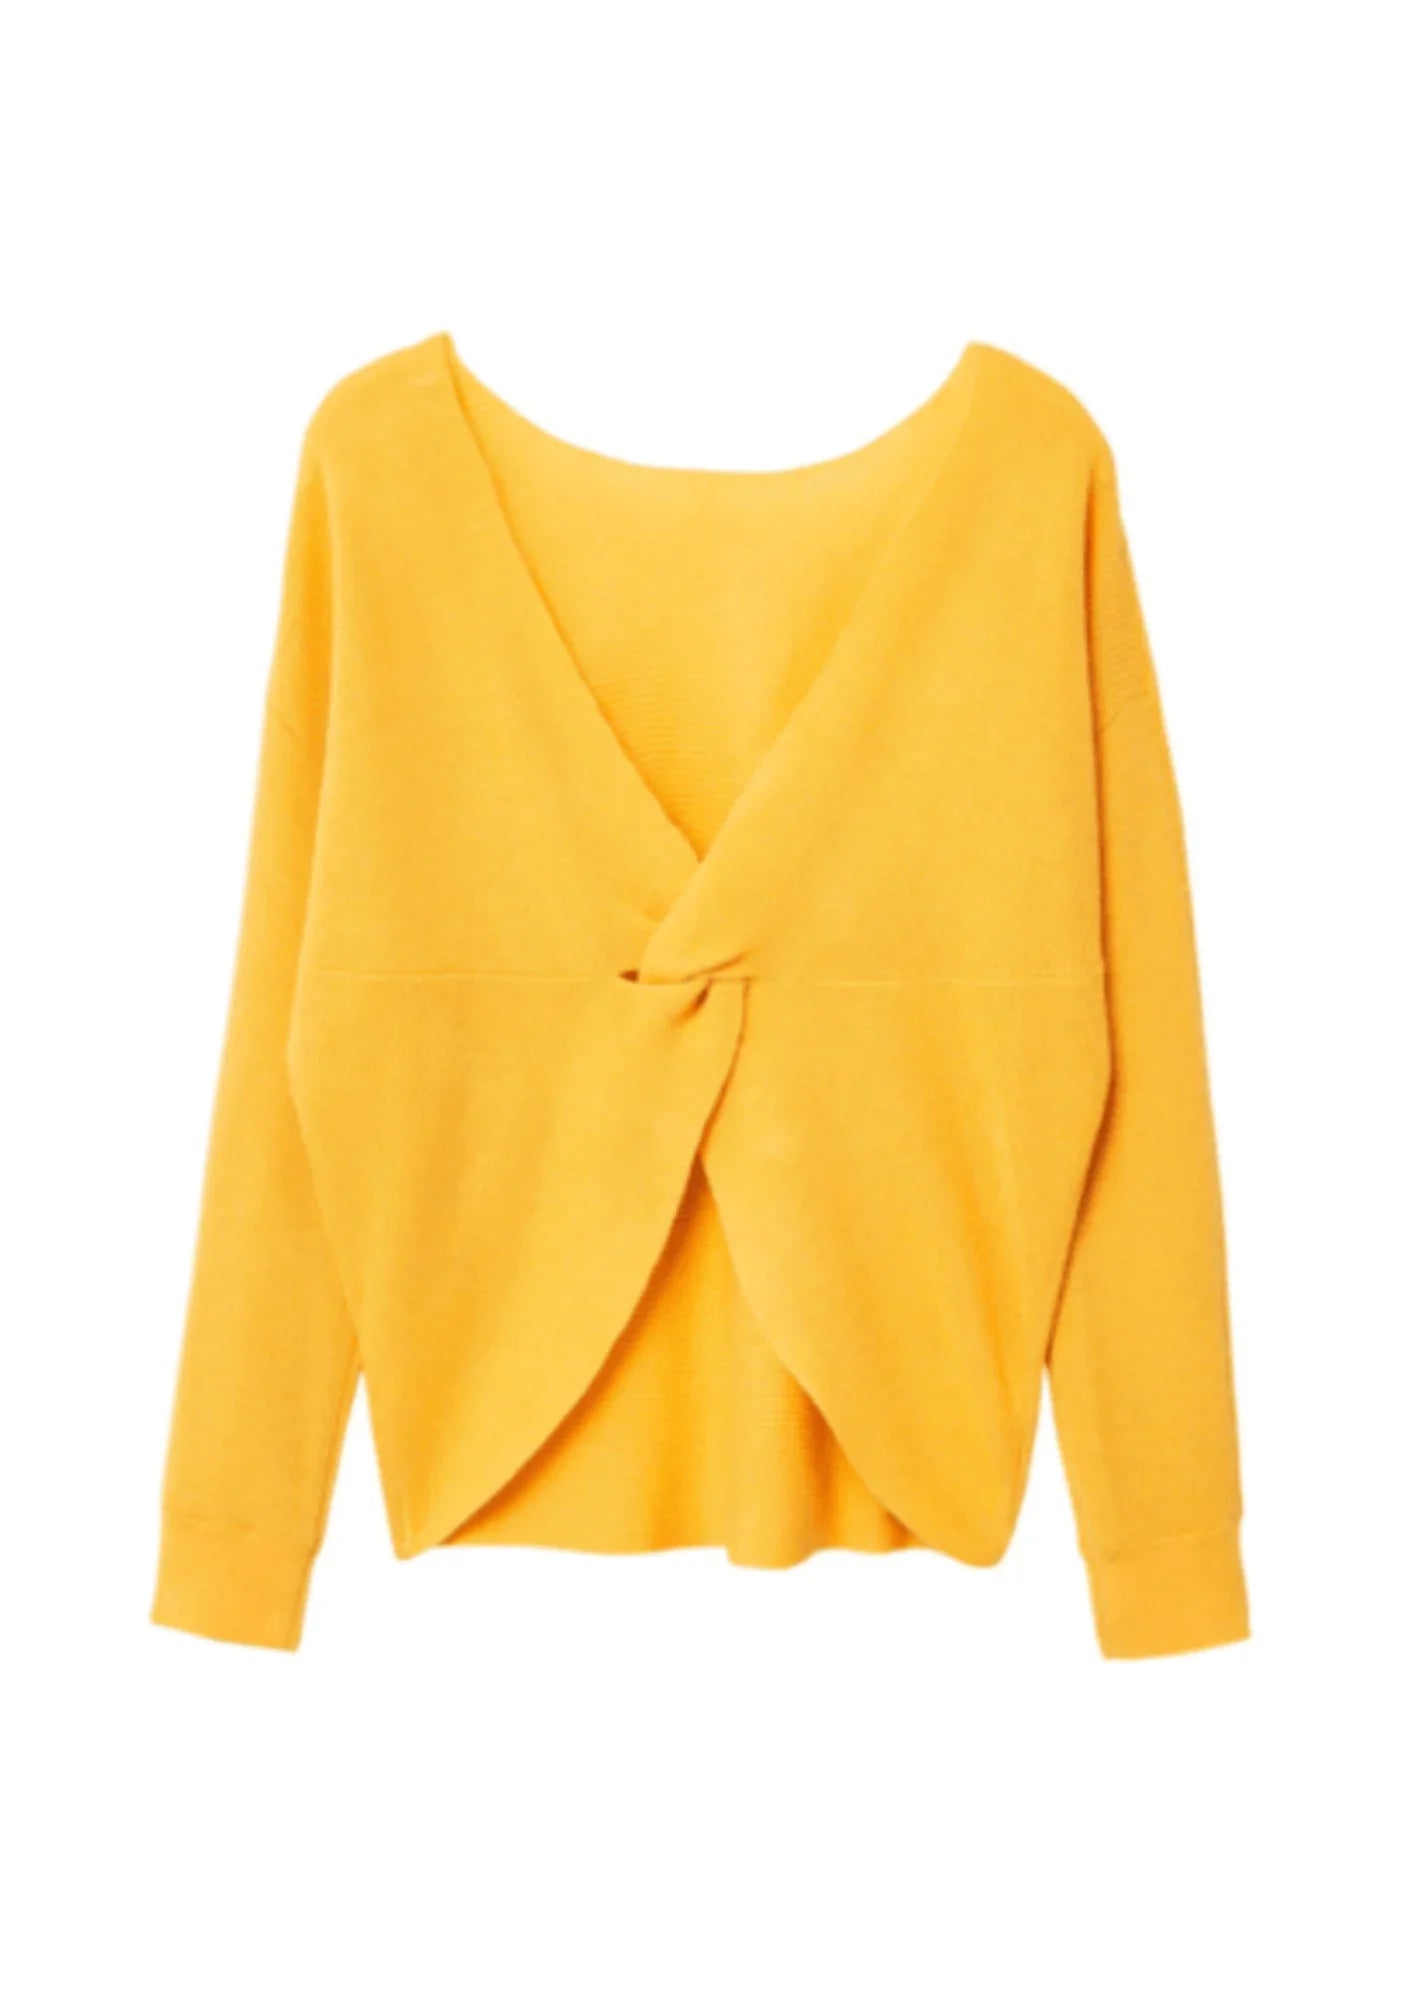 YELLOW KNOTTED PULLOVER